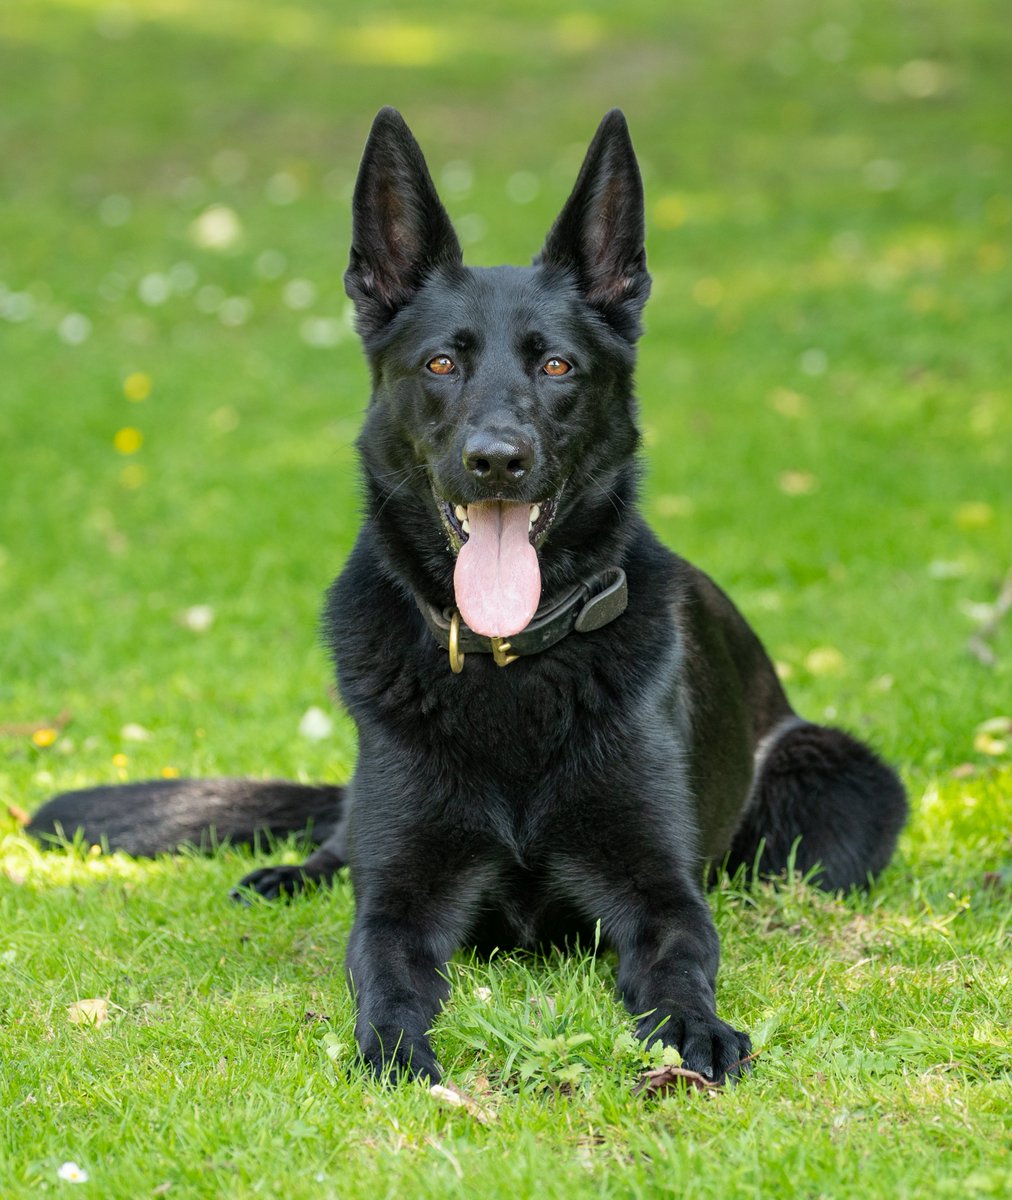 CAD 05-1243 - PD ELSA was called to a report of a High Risk missing elderly person. The individual had been missing for an hour and a half before PD ELSA was able to find a track and take her handler in to a local woods, where the individual was found safe and well #NotJustCrime